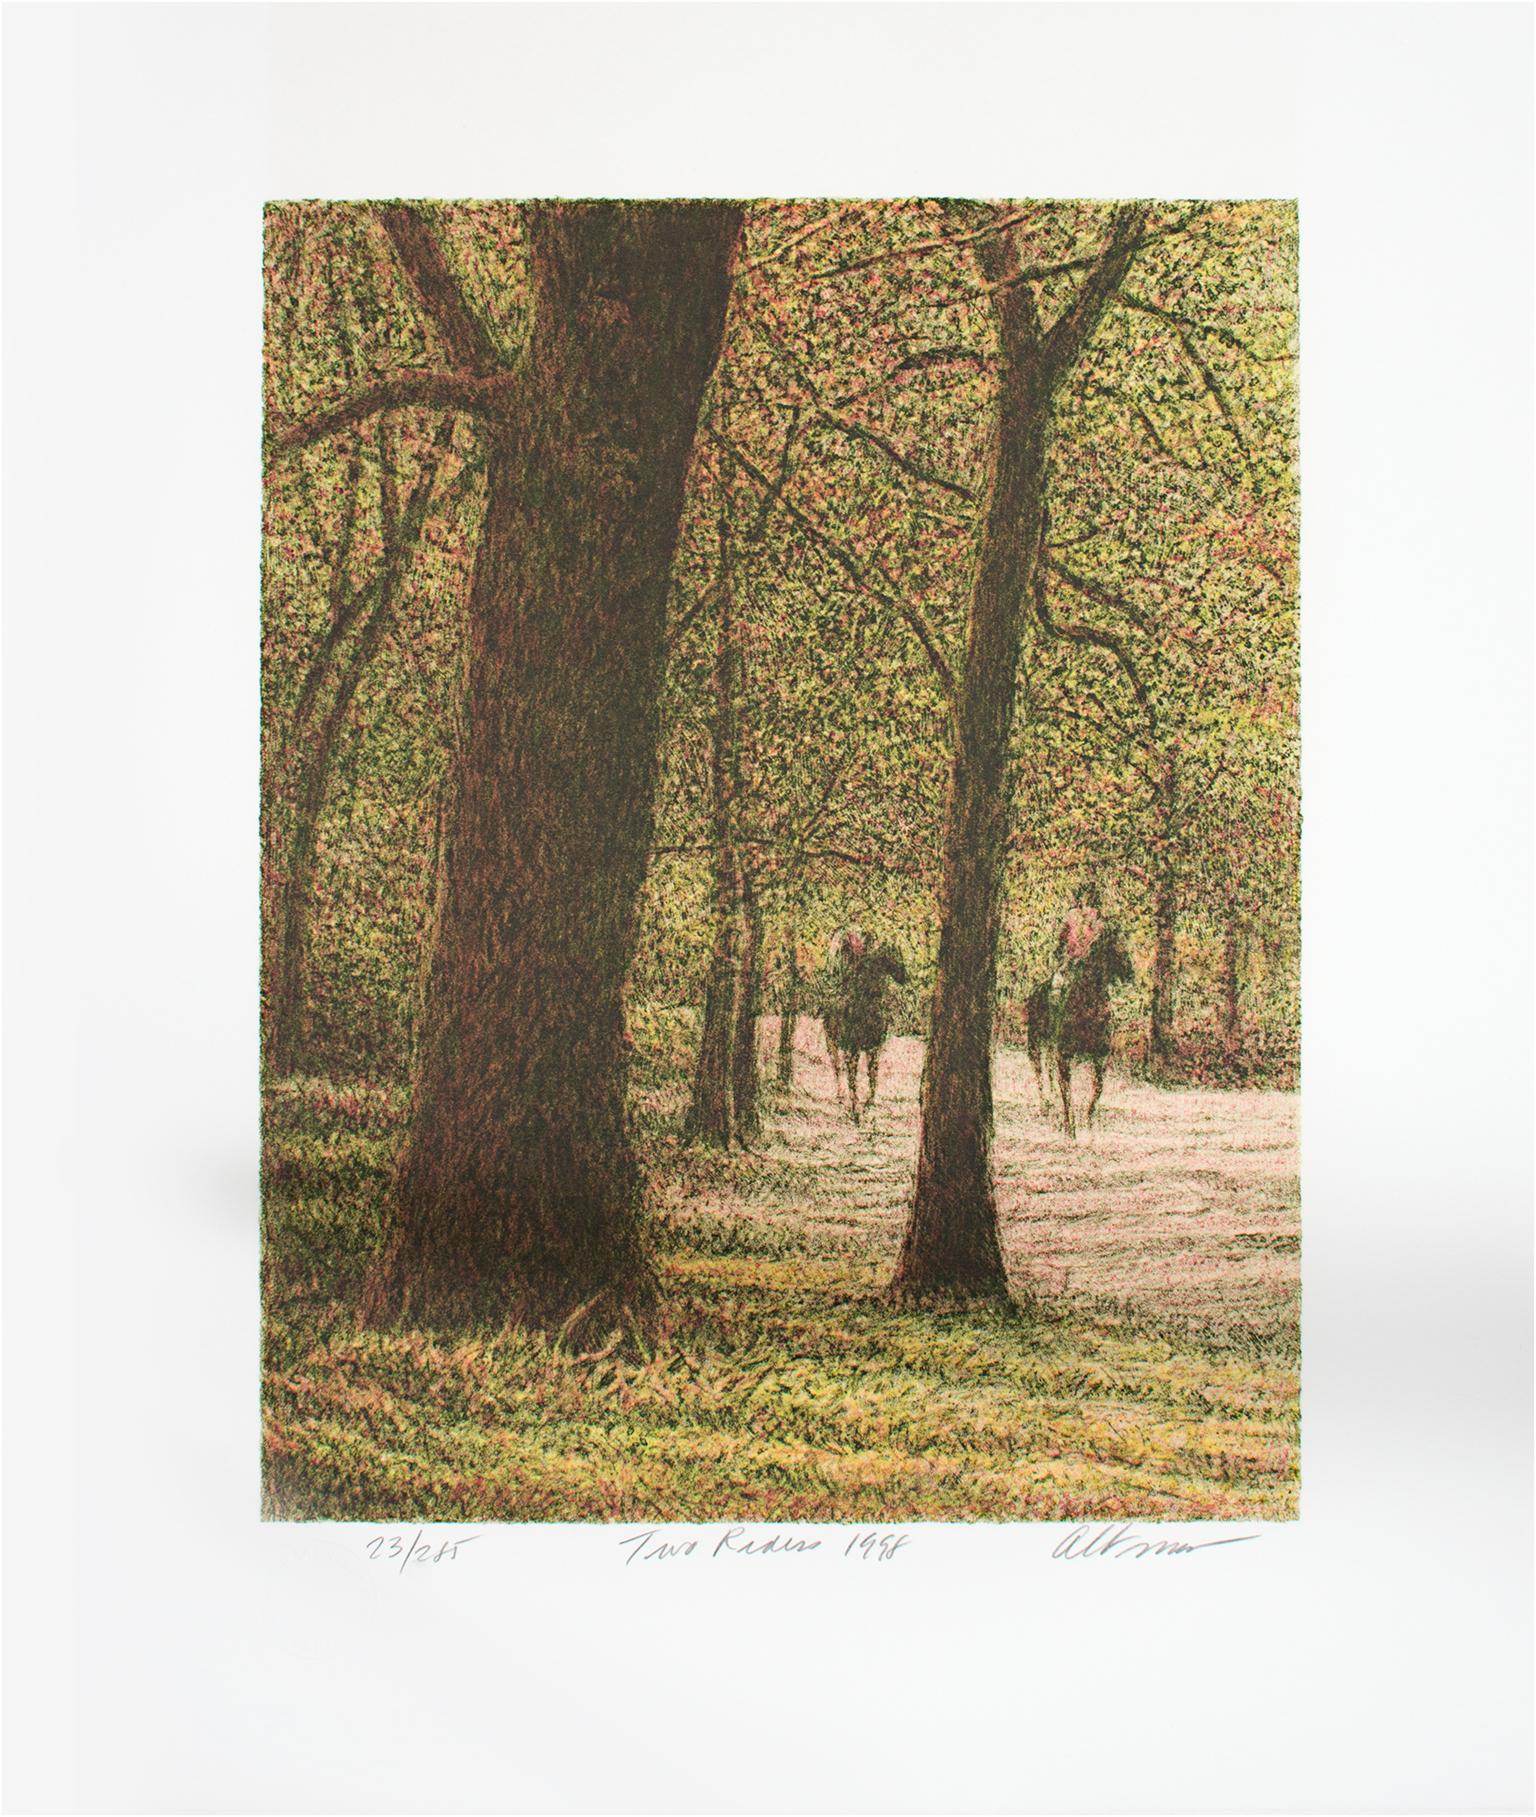 "Two Riders" is an original color lithograph by Harold Altman. It is numbered 23 out of an edition of 285. Within a quiet forest path, two riders glide through the forest on two horses. The trees lean in front of the viewer, almost shielding the